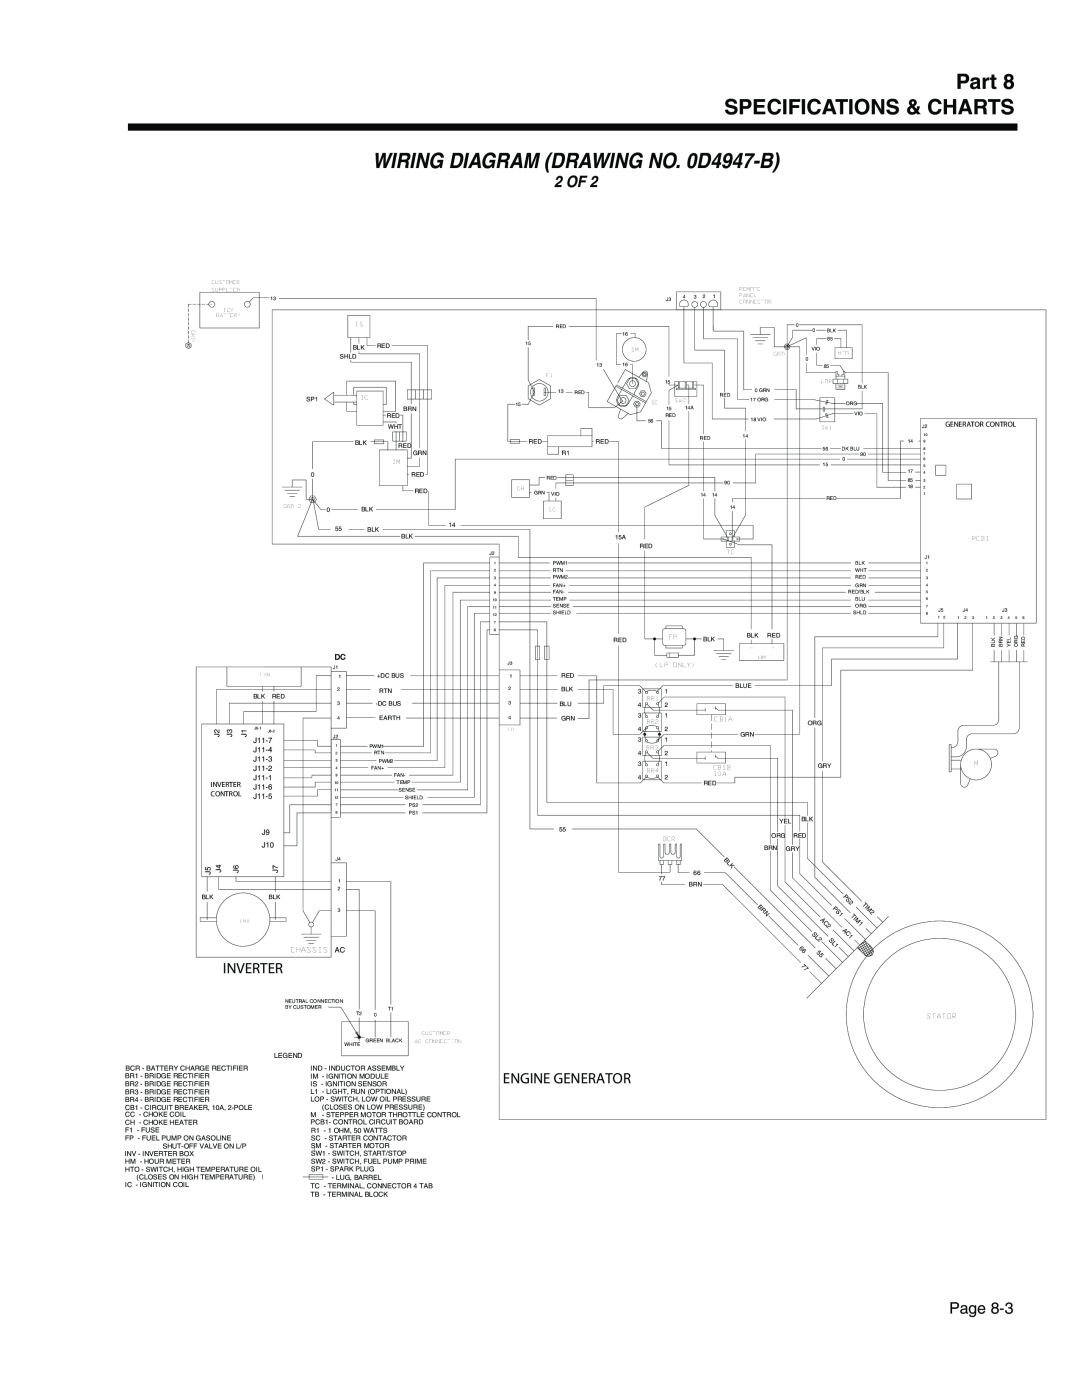 Generac Power Systems 941-2, 940-2 WIRING DIAGRAM DRAWING NO. 0D4947-B, Part SPECIFICATIONS & CHARTS, 2 OF, Page, Inverter 